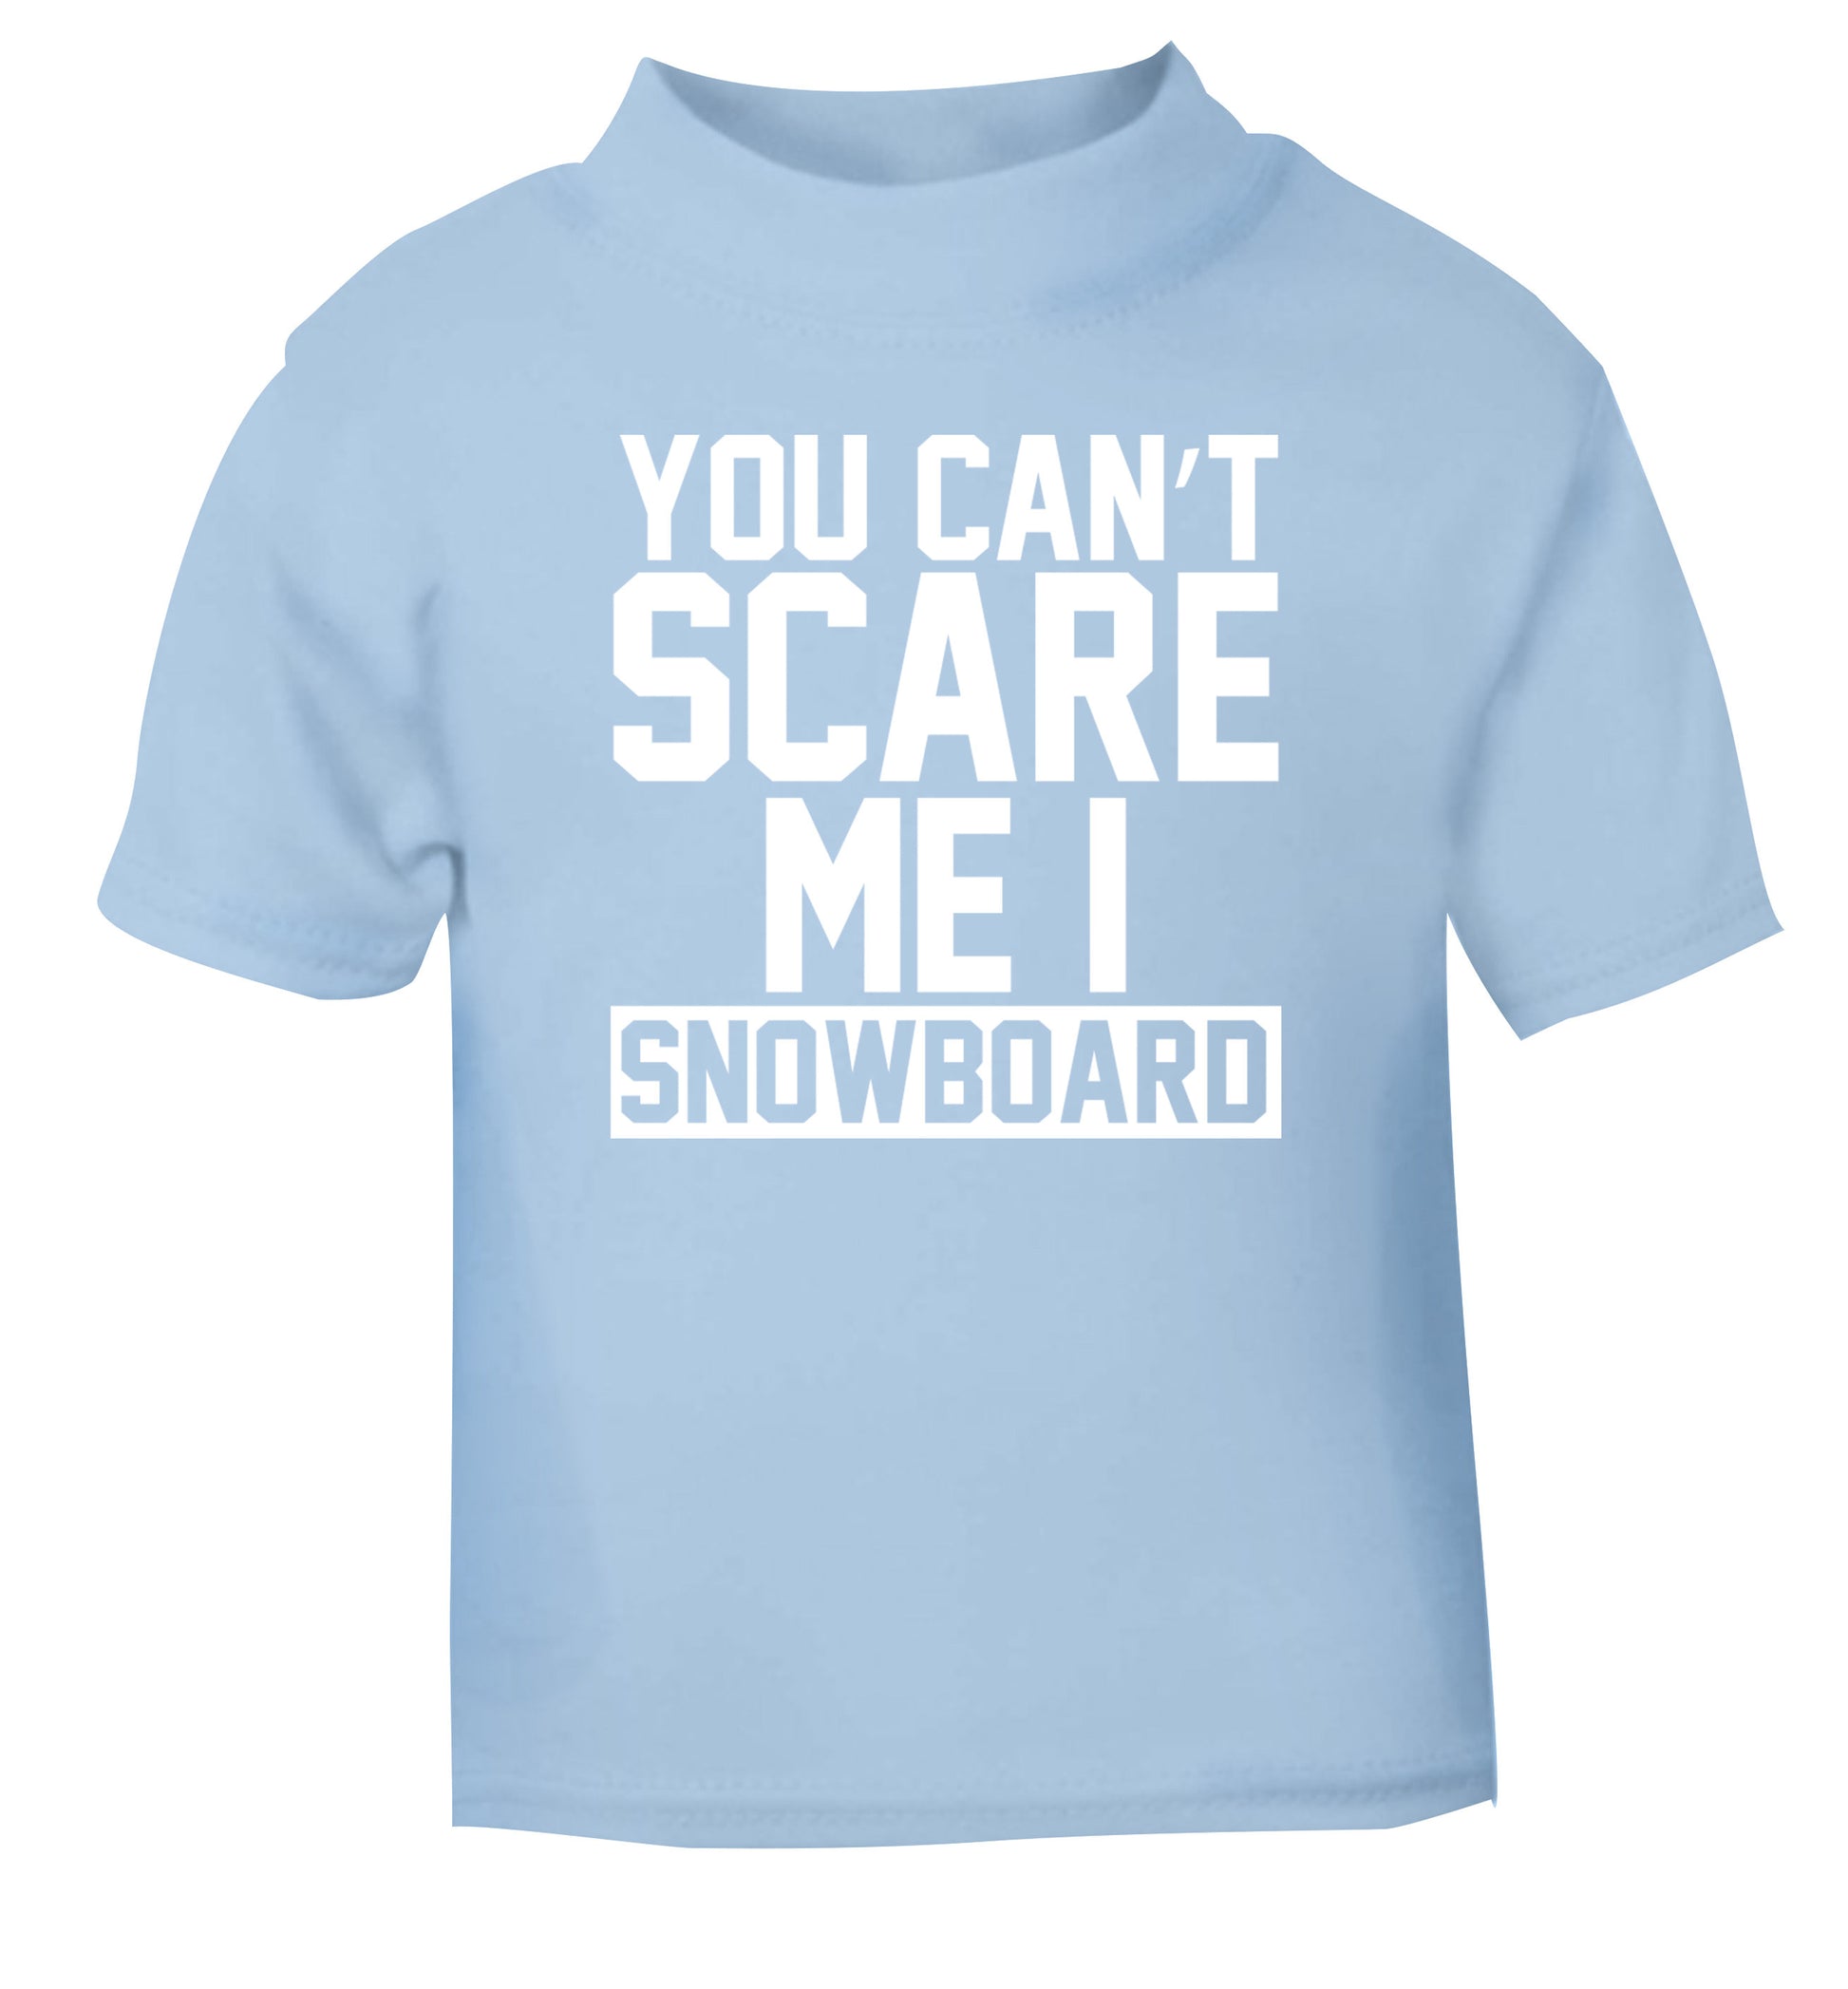 You can't scare me I snowboard light blue Baby Toddler Tshirt 2 Years